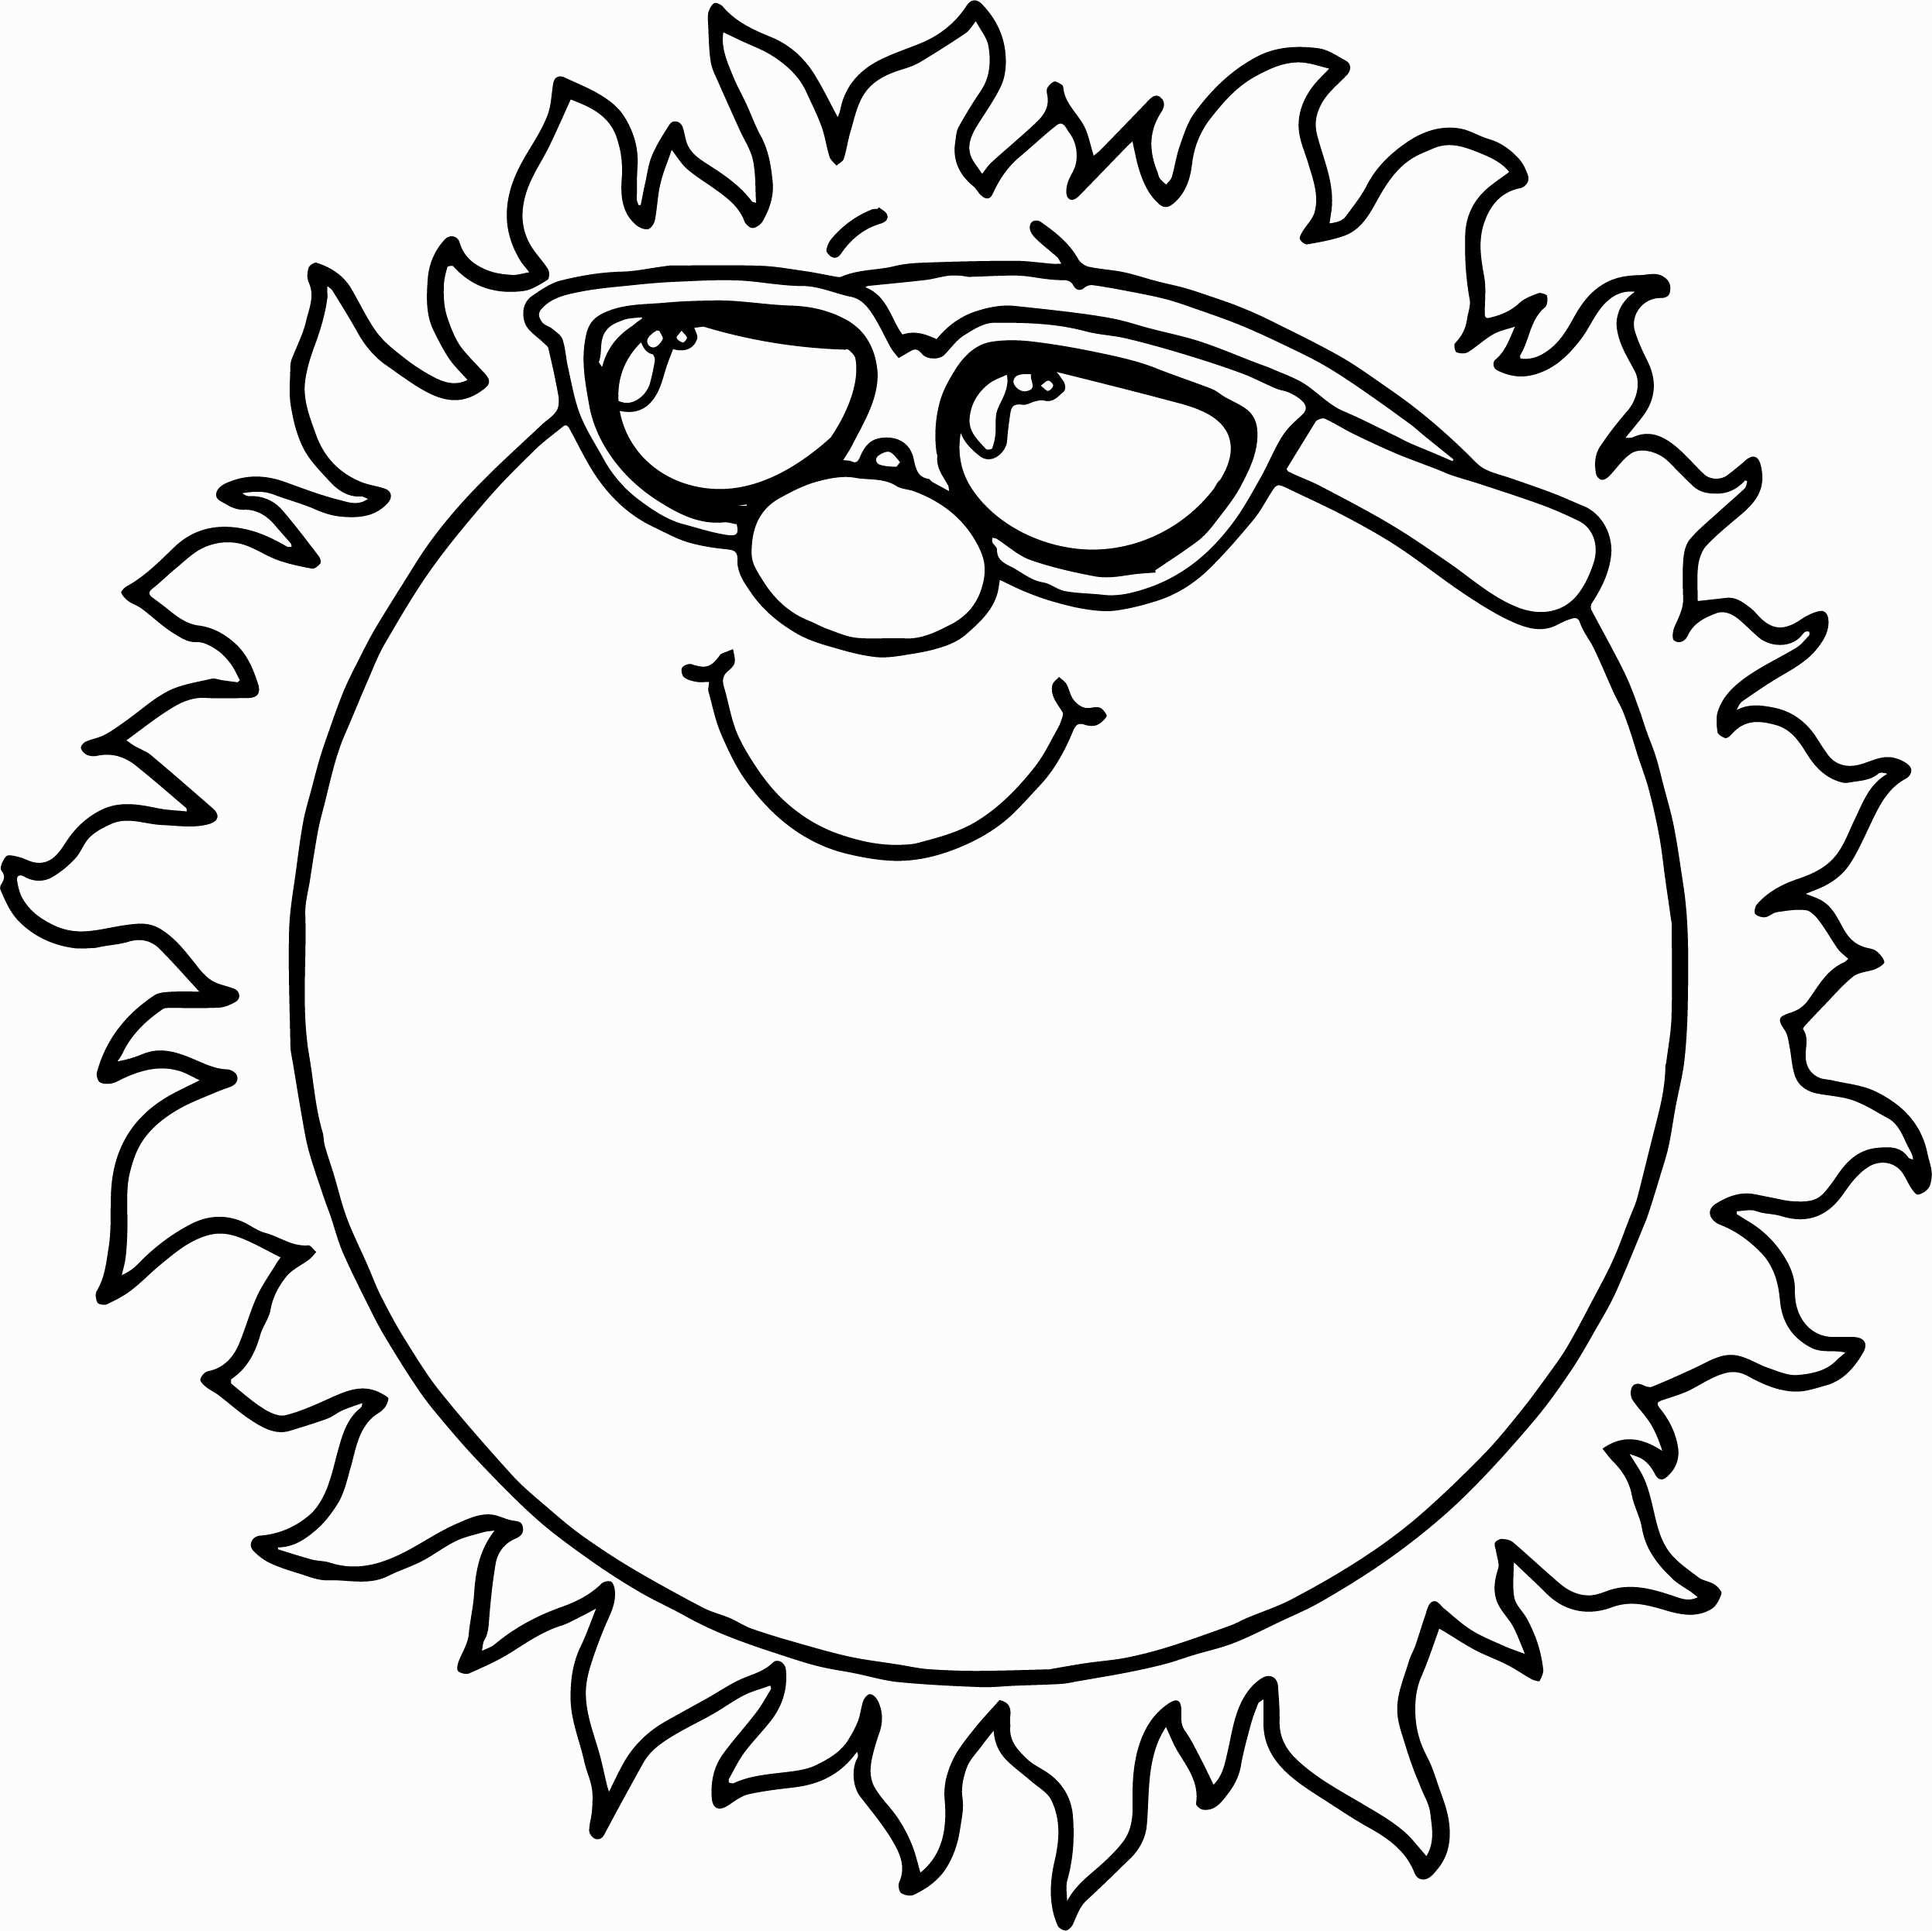 Sun Coloring Pages For Toddlers
 Free Printable Solar System Coloring Pages For Kids